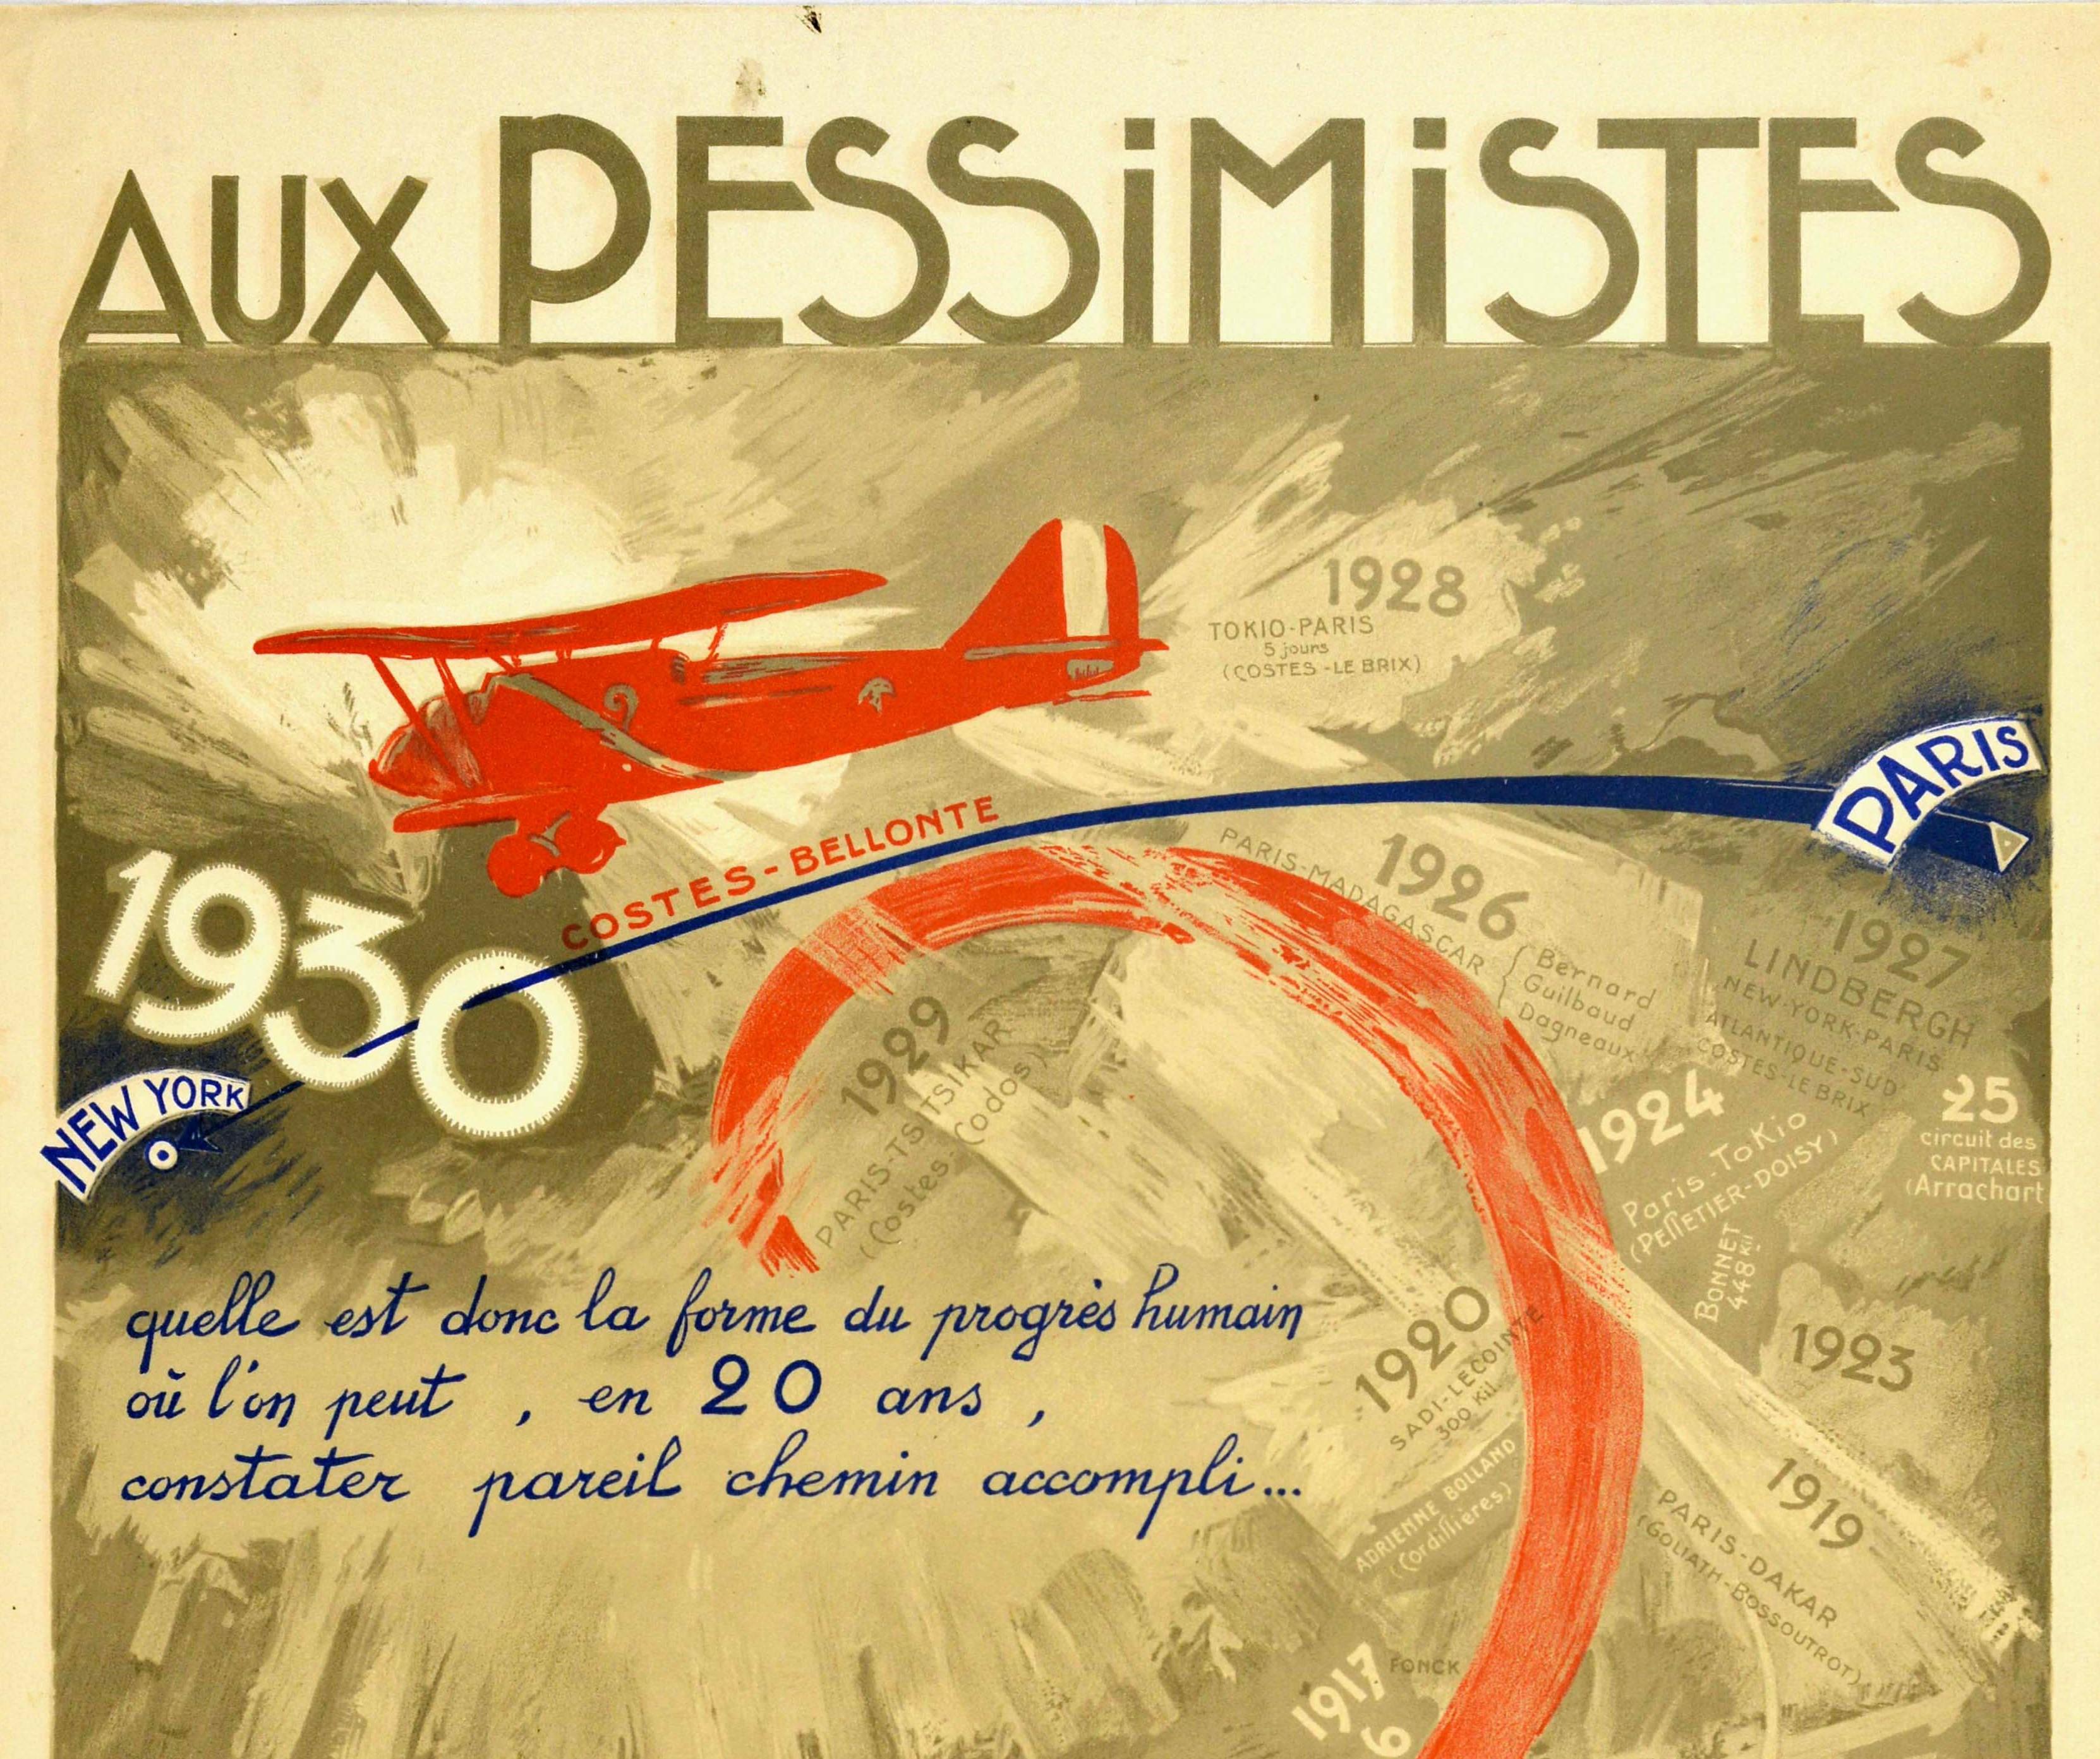 Original vintage aviation advertising poster - Aux Pessimistes / To The Pessimists - featuring a great design showing a red plane flying above a blue line joining markers from Paris to New York through the 0 of the date 1930 over a background of